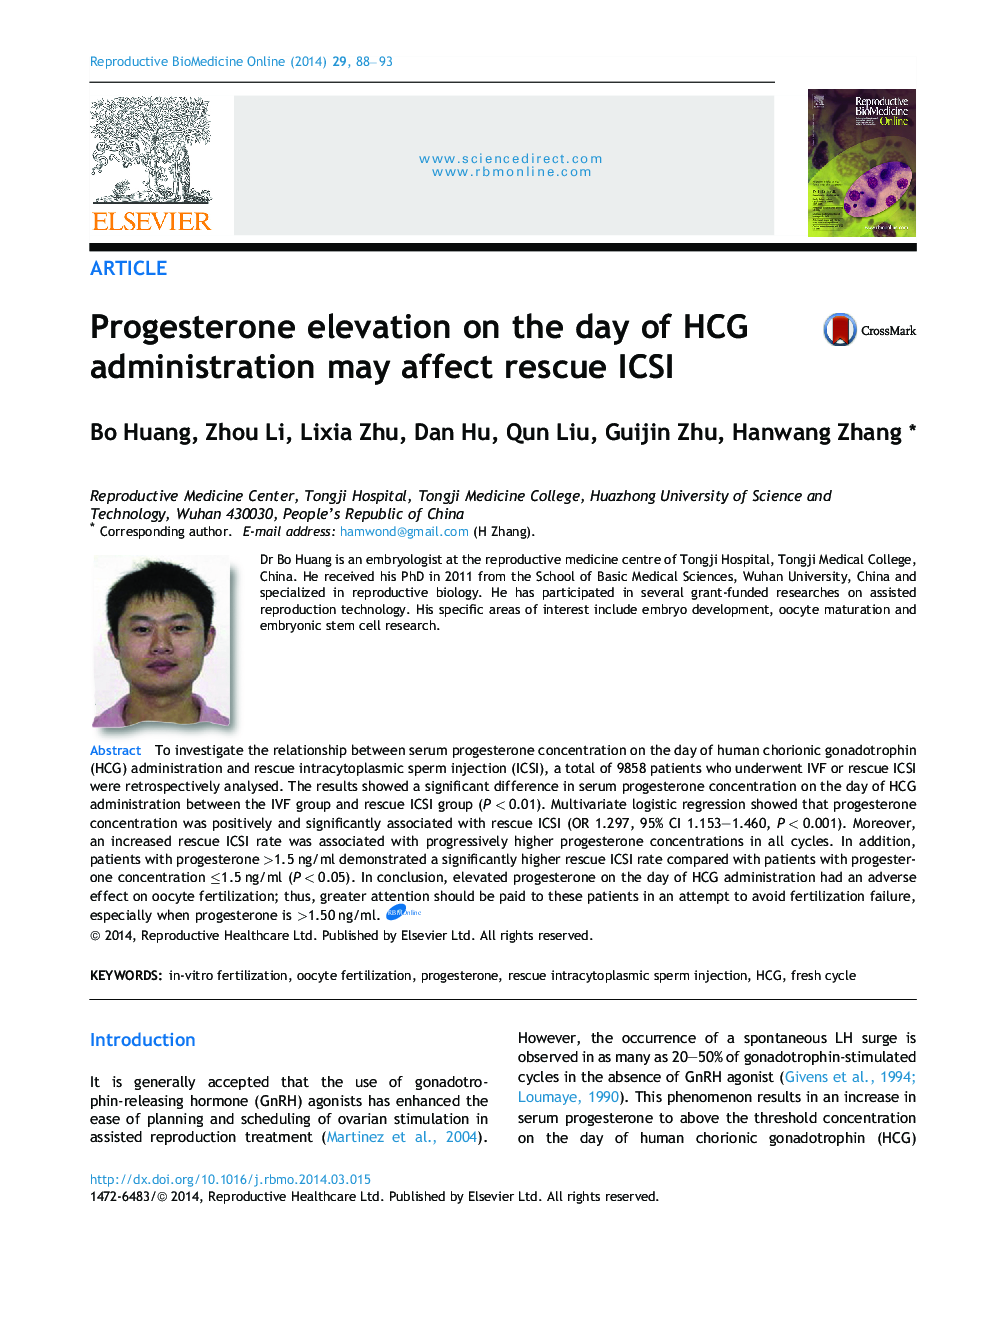 Progesterone elevation on the day of HCG administration may affect rescue ICSI 